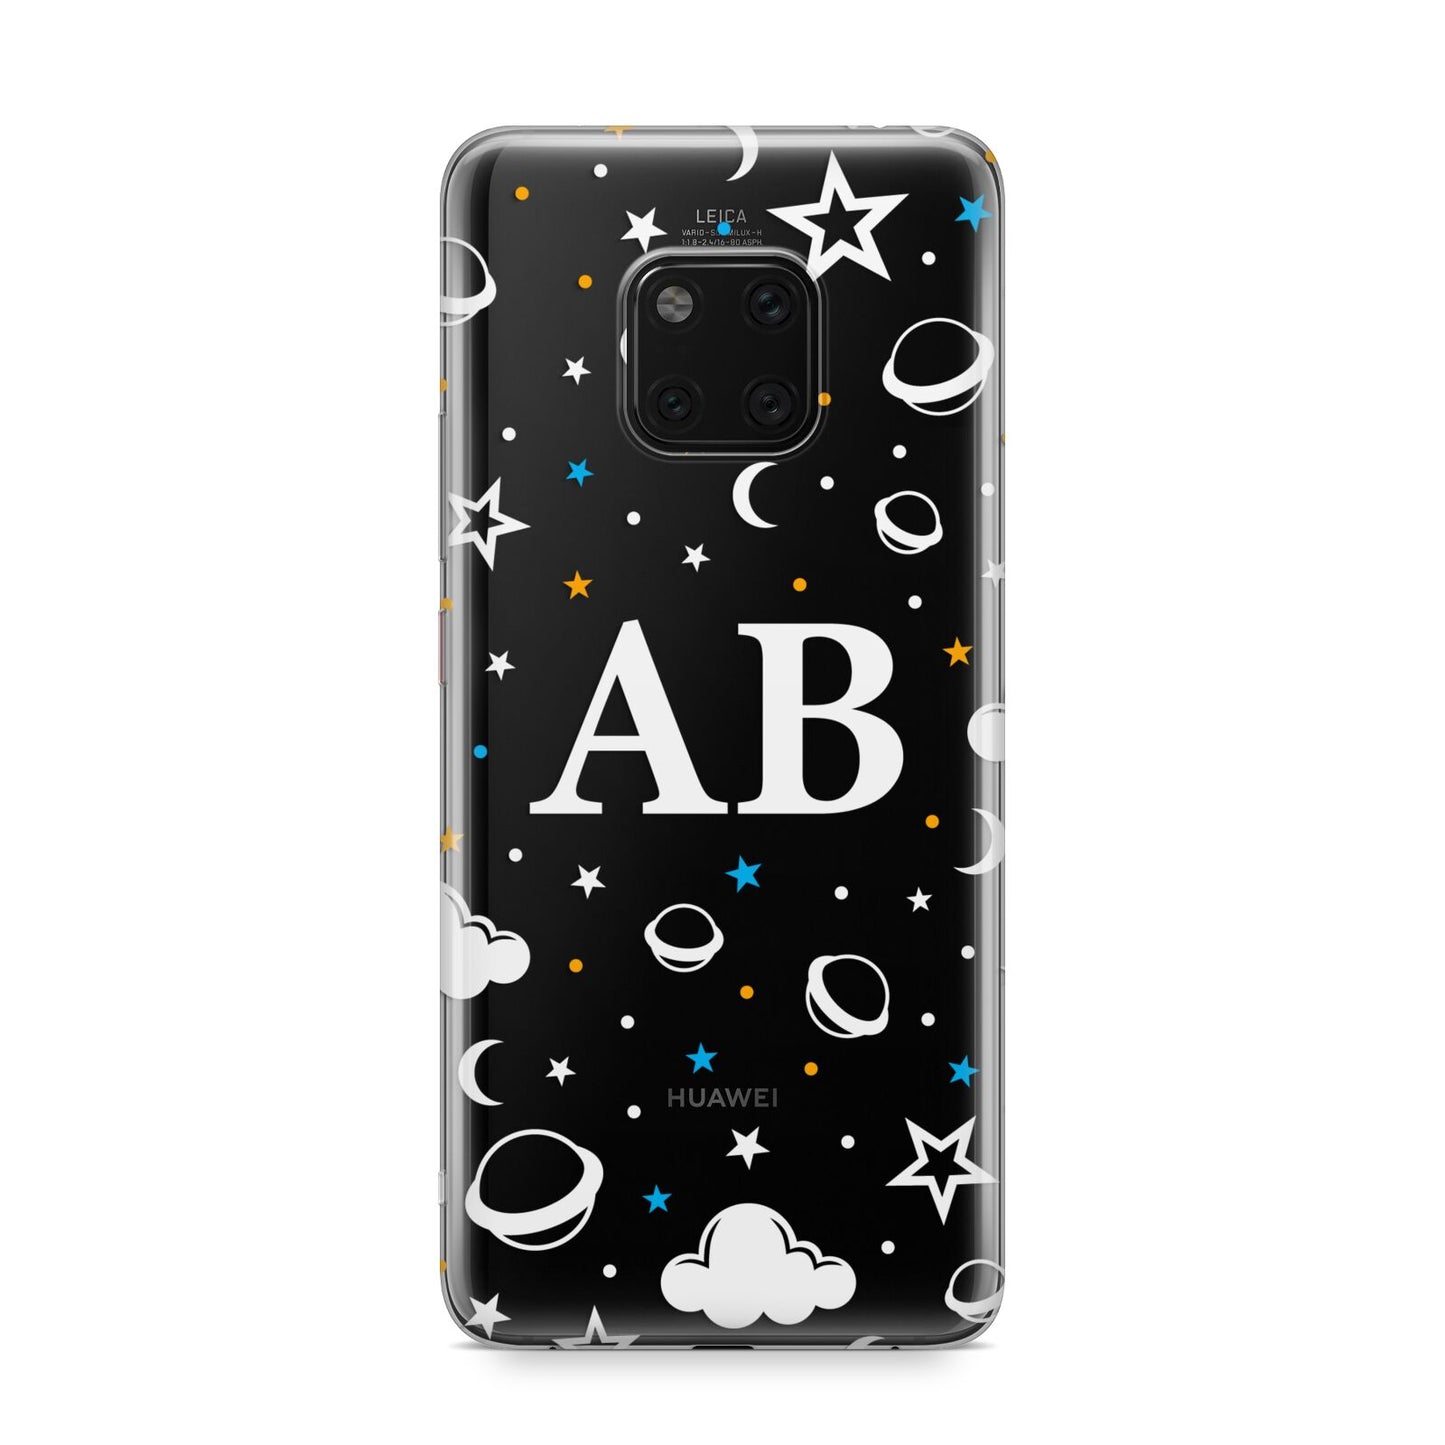 Astronomical Initials Huawei Mate 20 Pro Phone Case